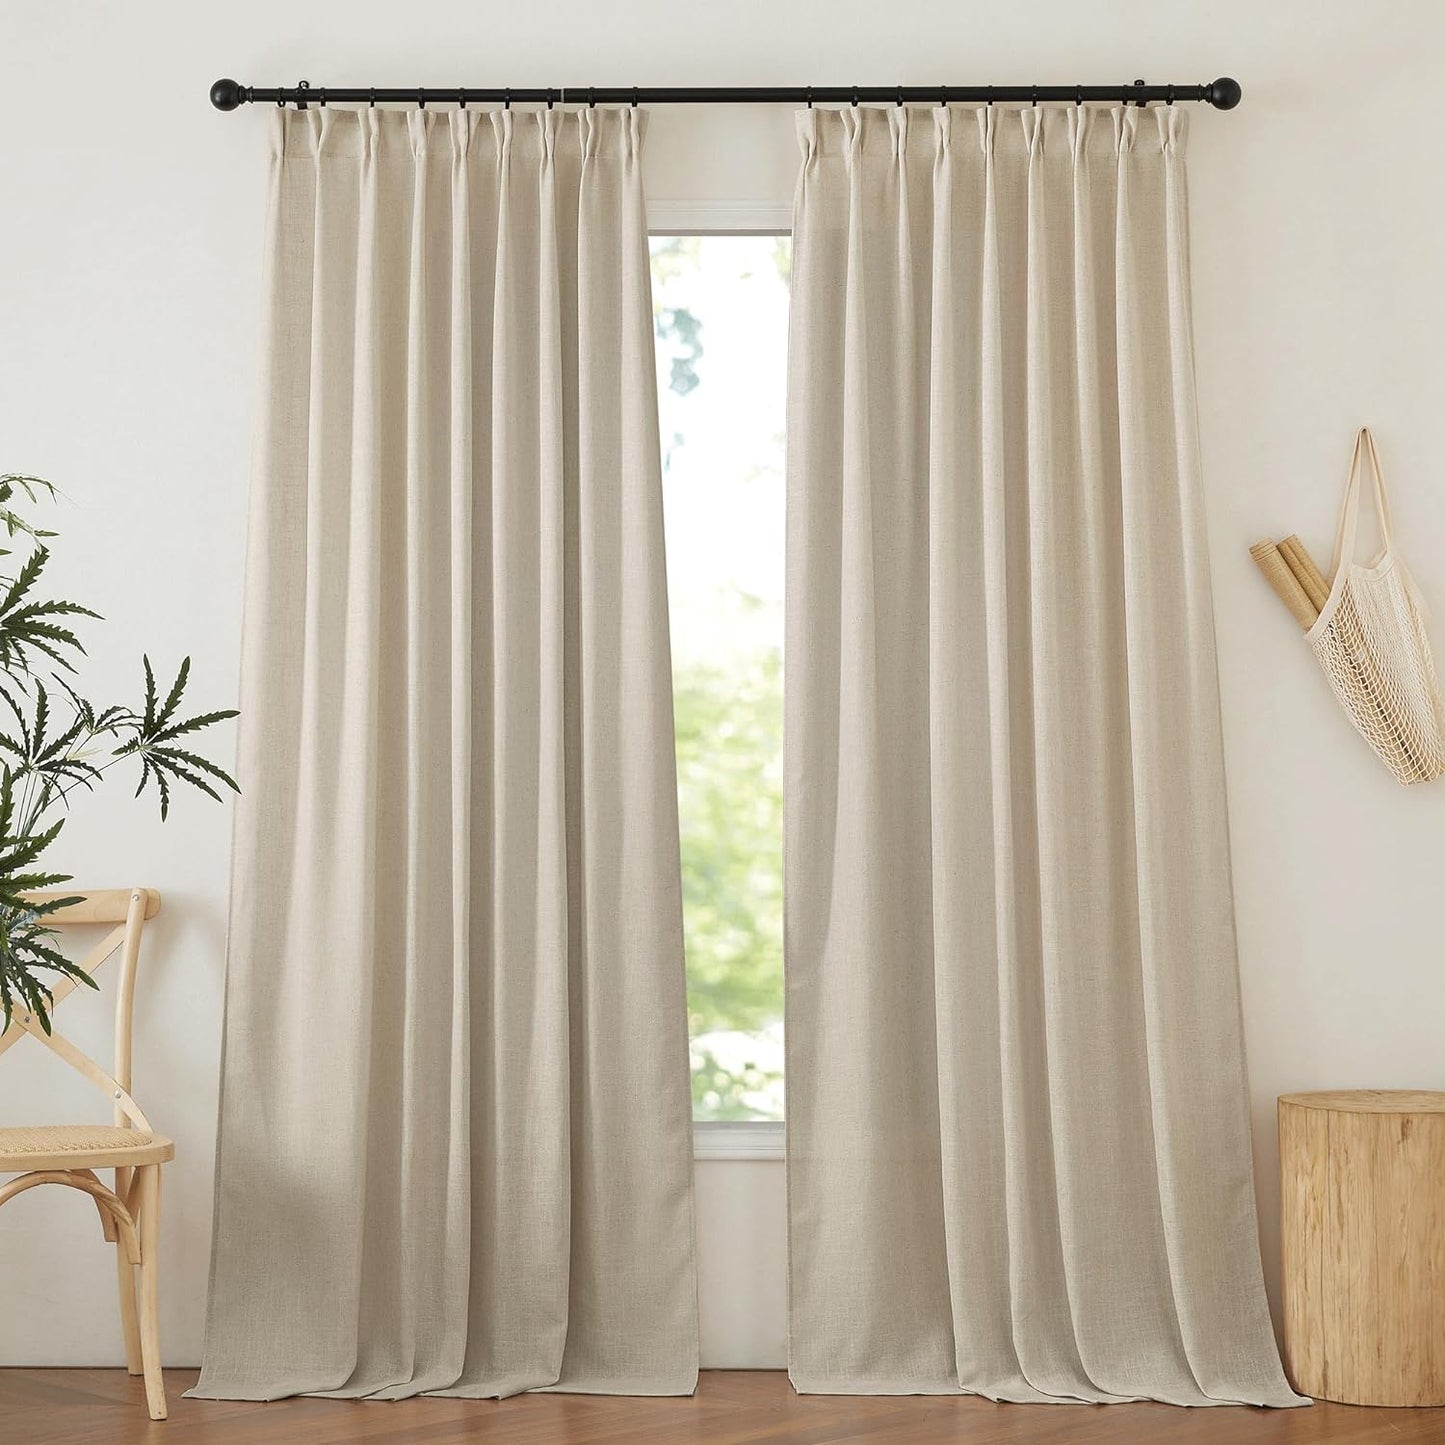 NICETOWN White Curtains Sheer - Semi Sheer Window Covering, Light & Airy Privacy Rod Pocket Back Tab Pinche Pleated Drapes for Bedroom Living Room Patio Glass Door, 52 X 63 Inches Long, Set of 2  NICETOWN Taupe W52 X L108 